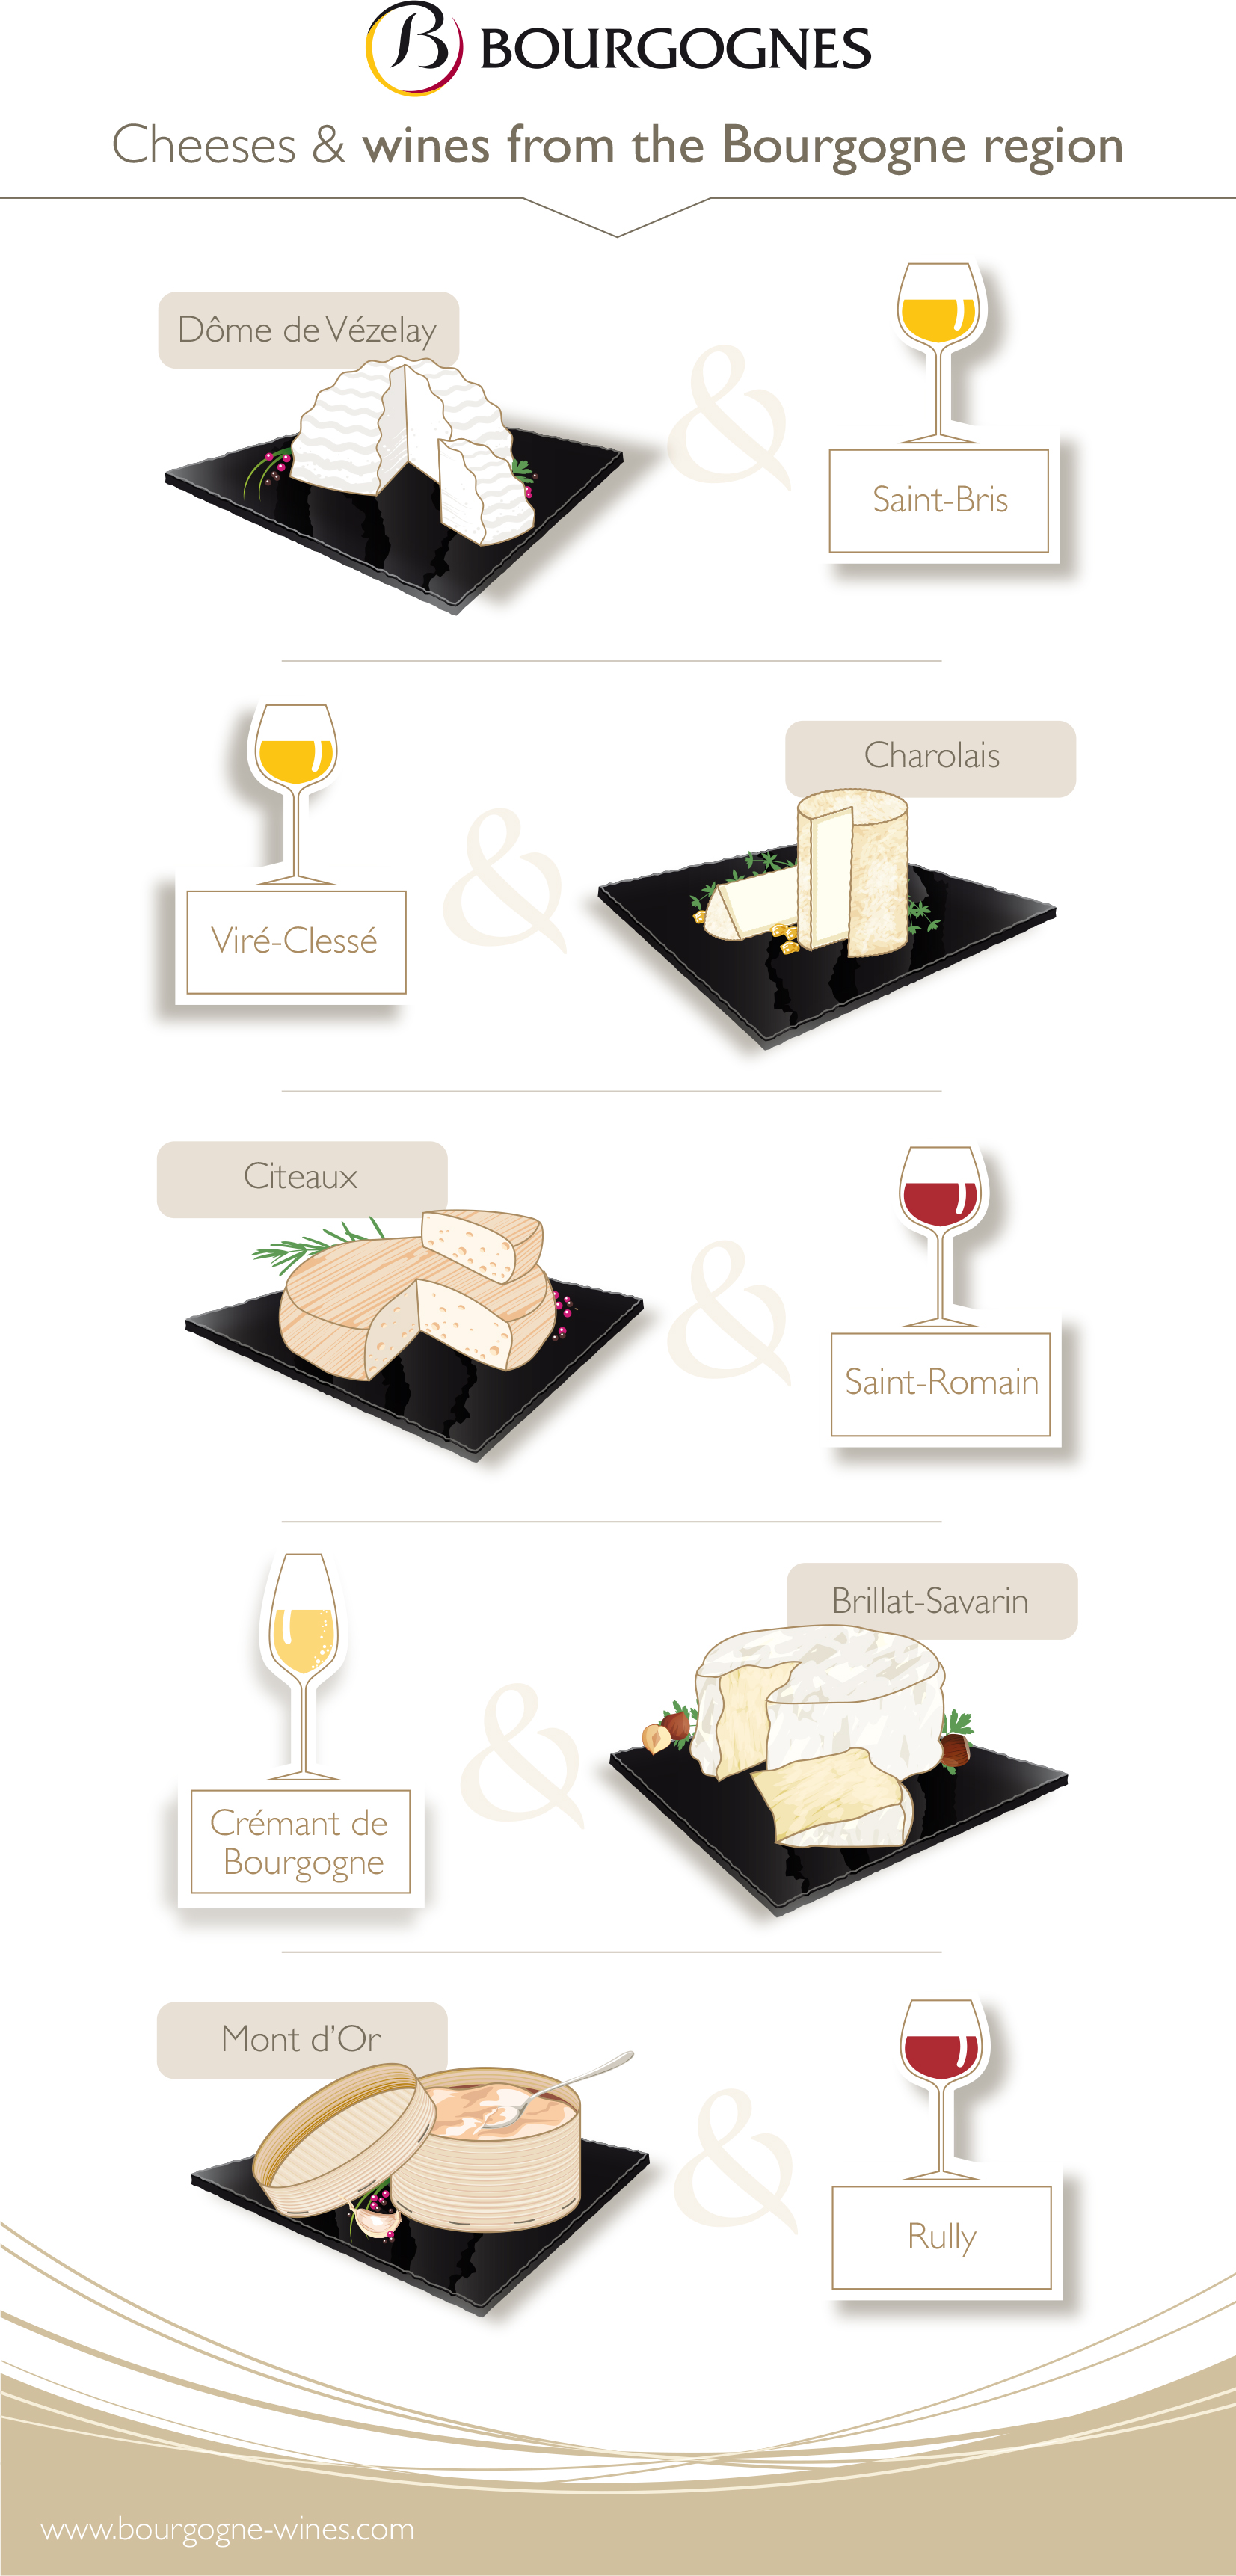 Regional cheeses and Bourgogne wines